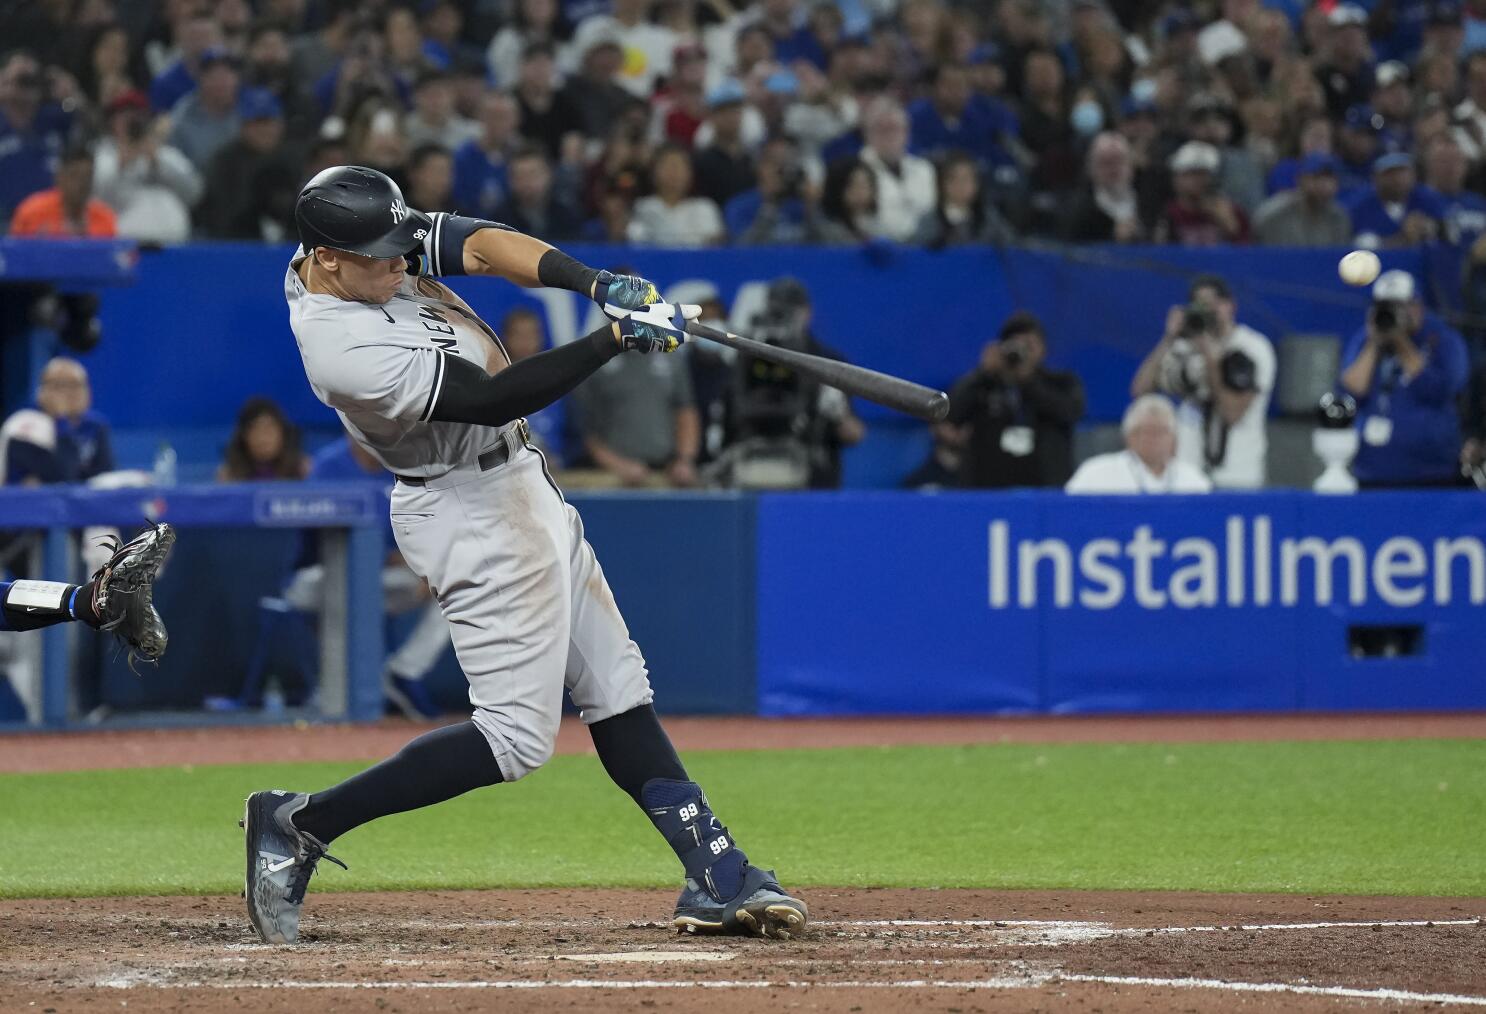 Yankees beat Blue Jays for AL East title, Judge stuck at 60 homers